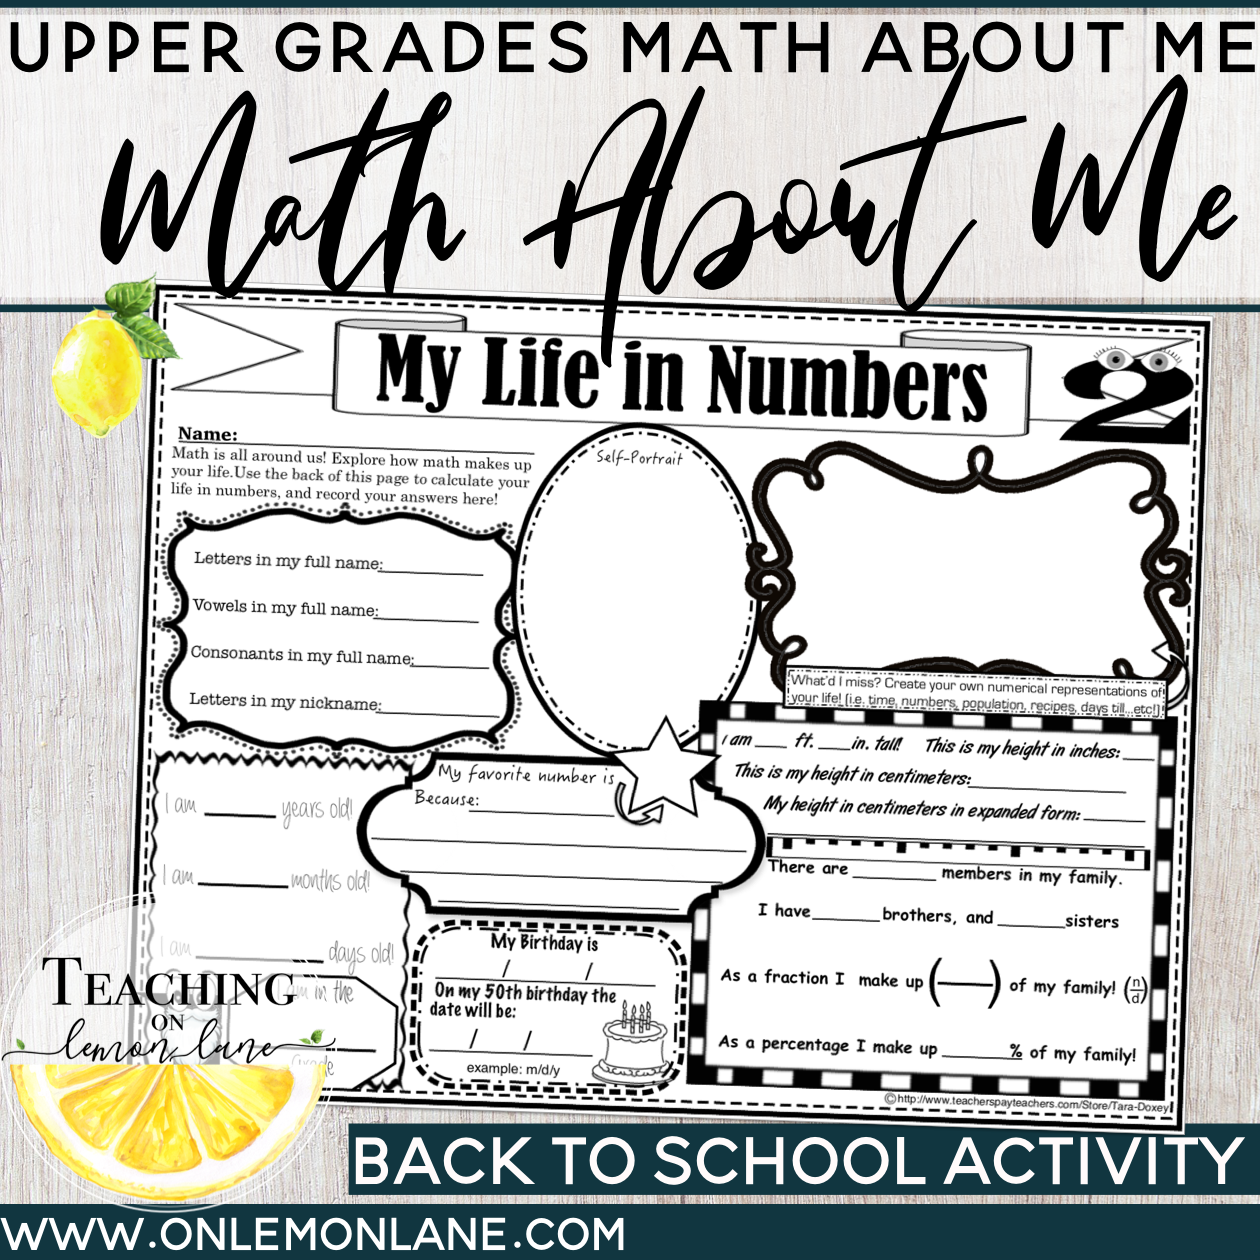 All About Me Math Worksheets